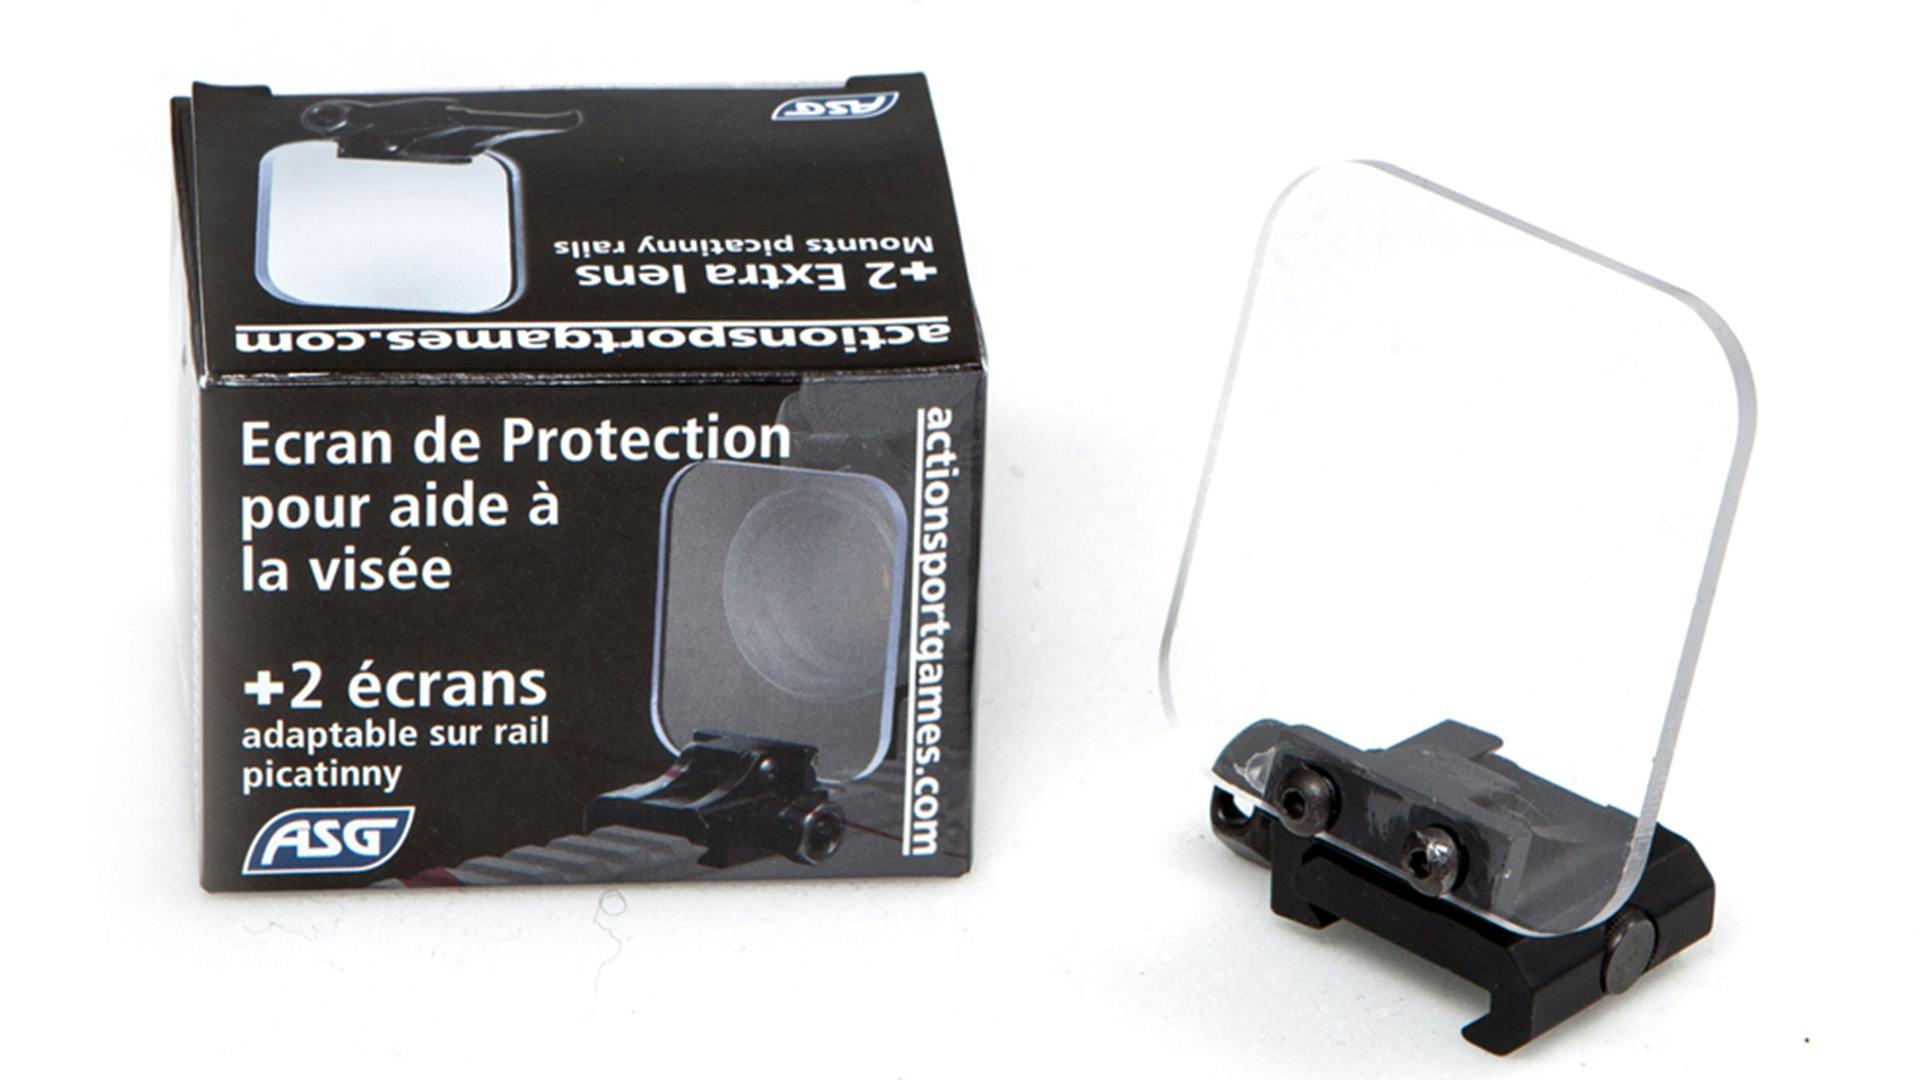 Airsoft Lens Sight Protector Cover Shield w/20mm Rail Mount For Rifle Scope